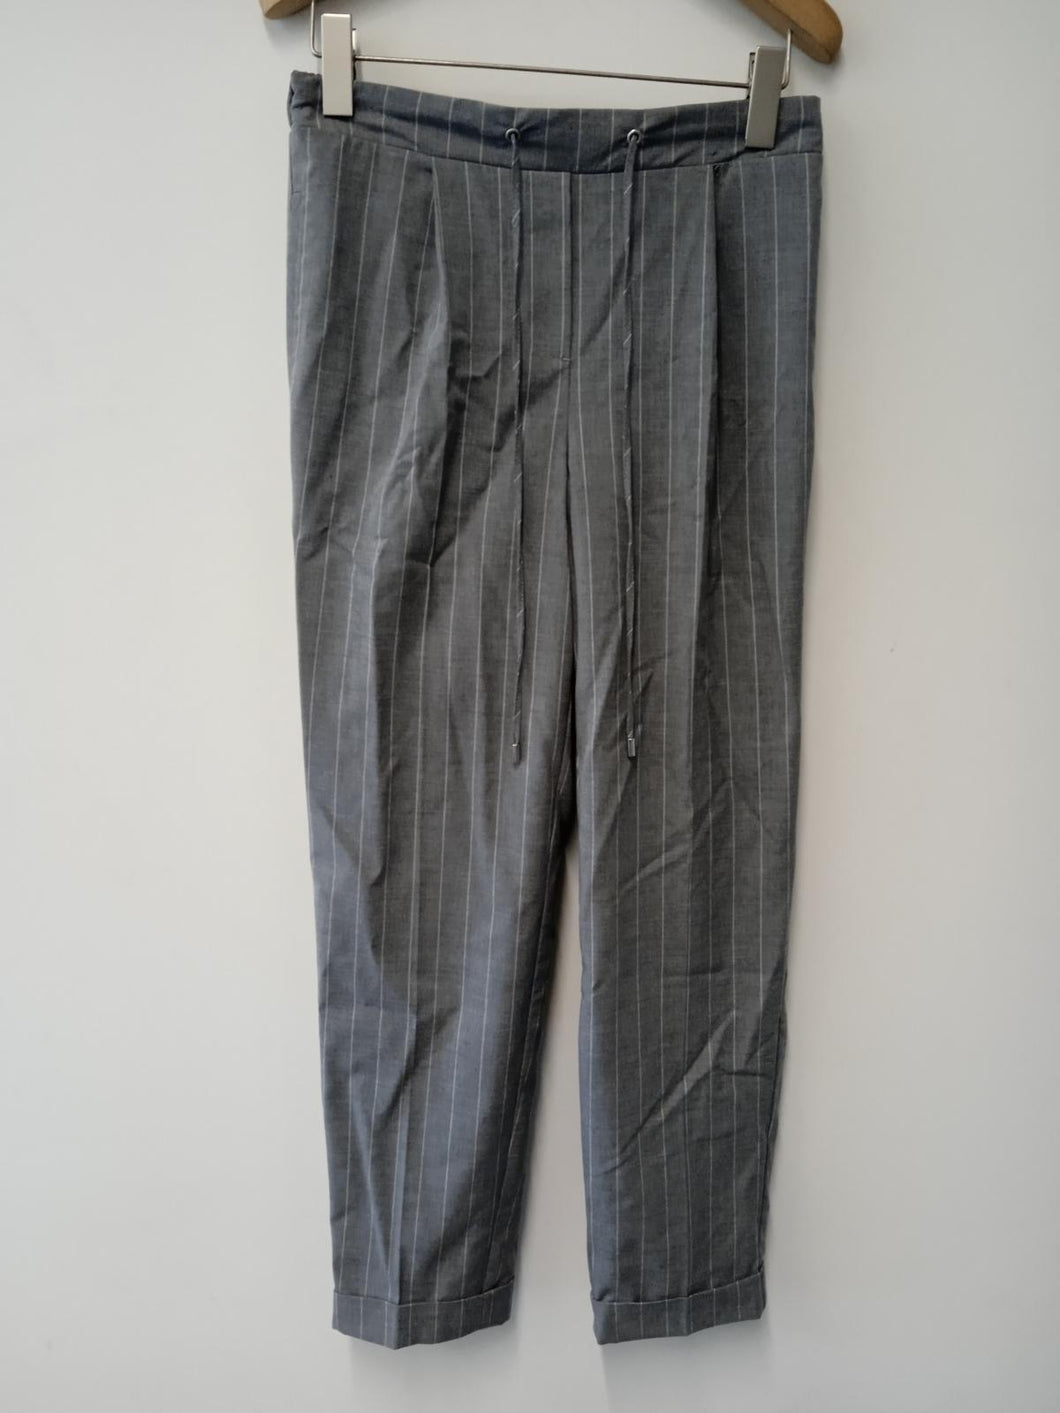 MARKS & SPENCER Ladies Grey Striped Elasticated Waist Dress Trousers Size UK8